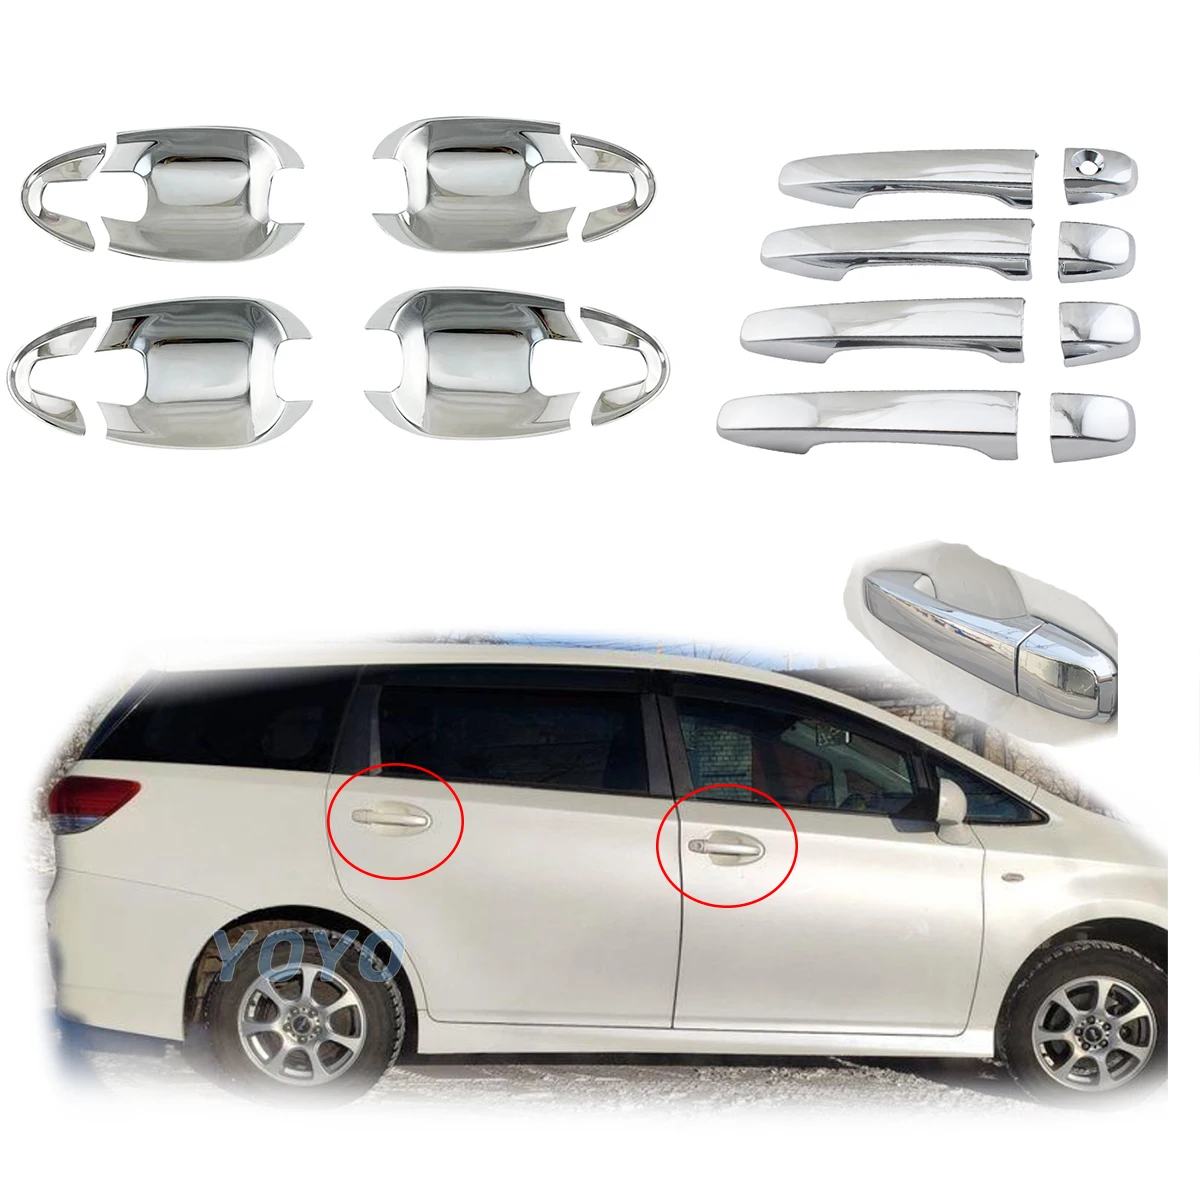 

ABS Chrome Car Accessorie Plated Exterior Door Handle Bowl Cover Trim Paste Style For Toyota Wish 2010 2011 2012 2013 2014 2015